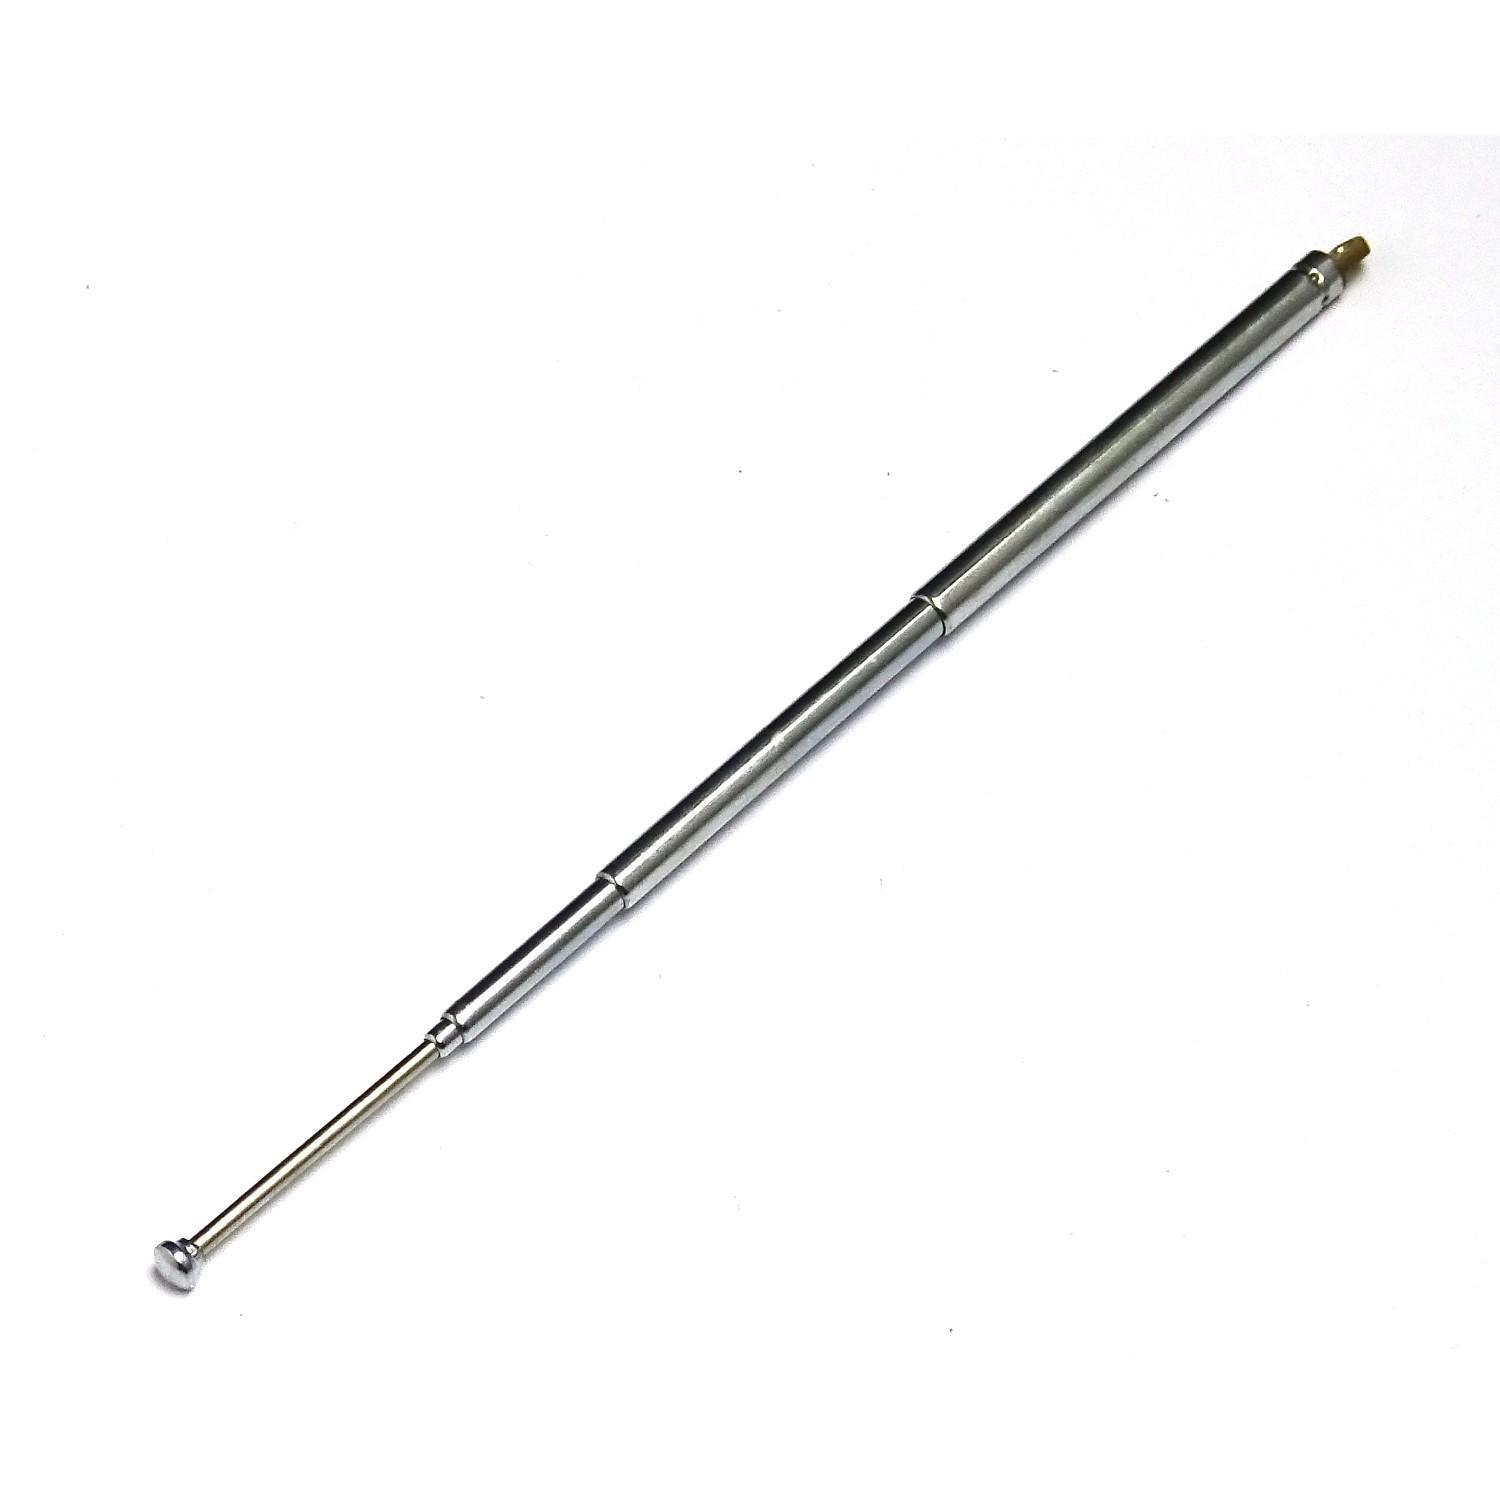 Replacement 5 Sections Telescopic Antenna Aerial for Car Phone Radio TV - UK Seller